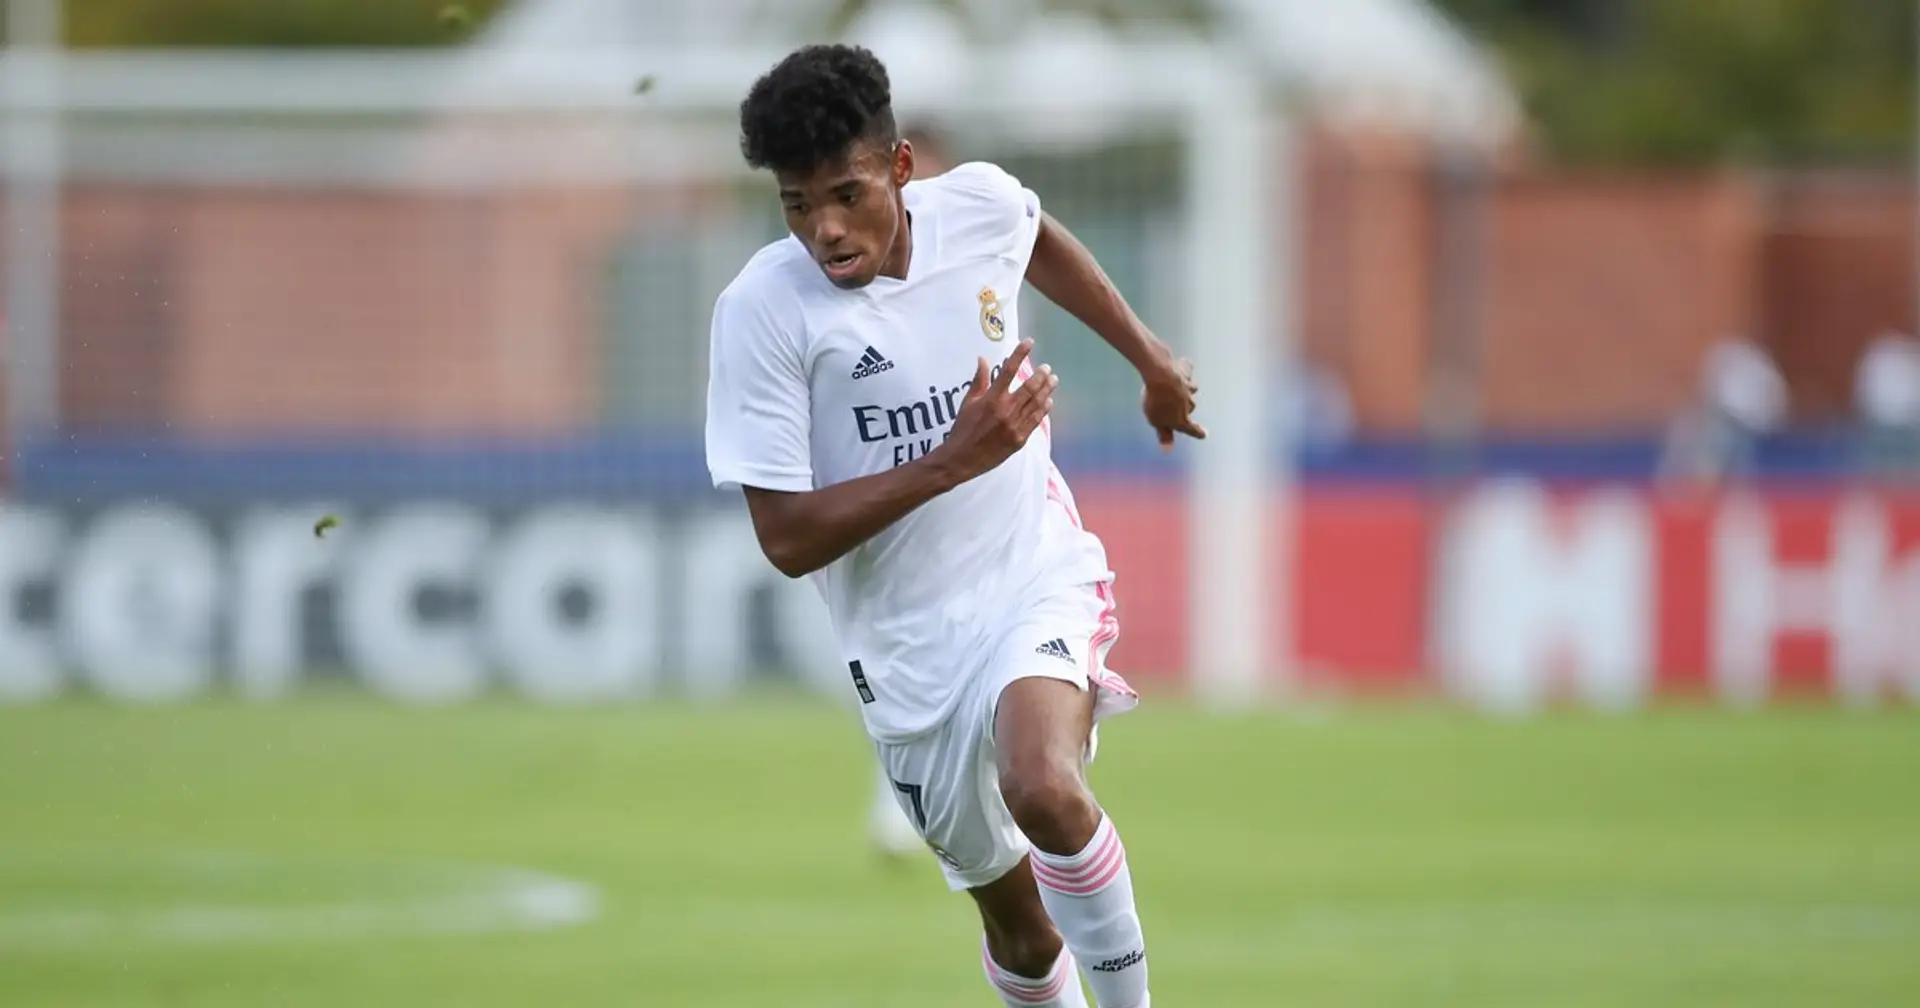 Nigerian-Korean descent, Spain U19 international: player with most mixed ancestry in football makes Real Madrid debut